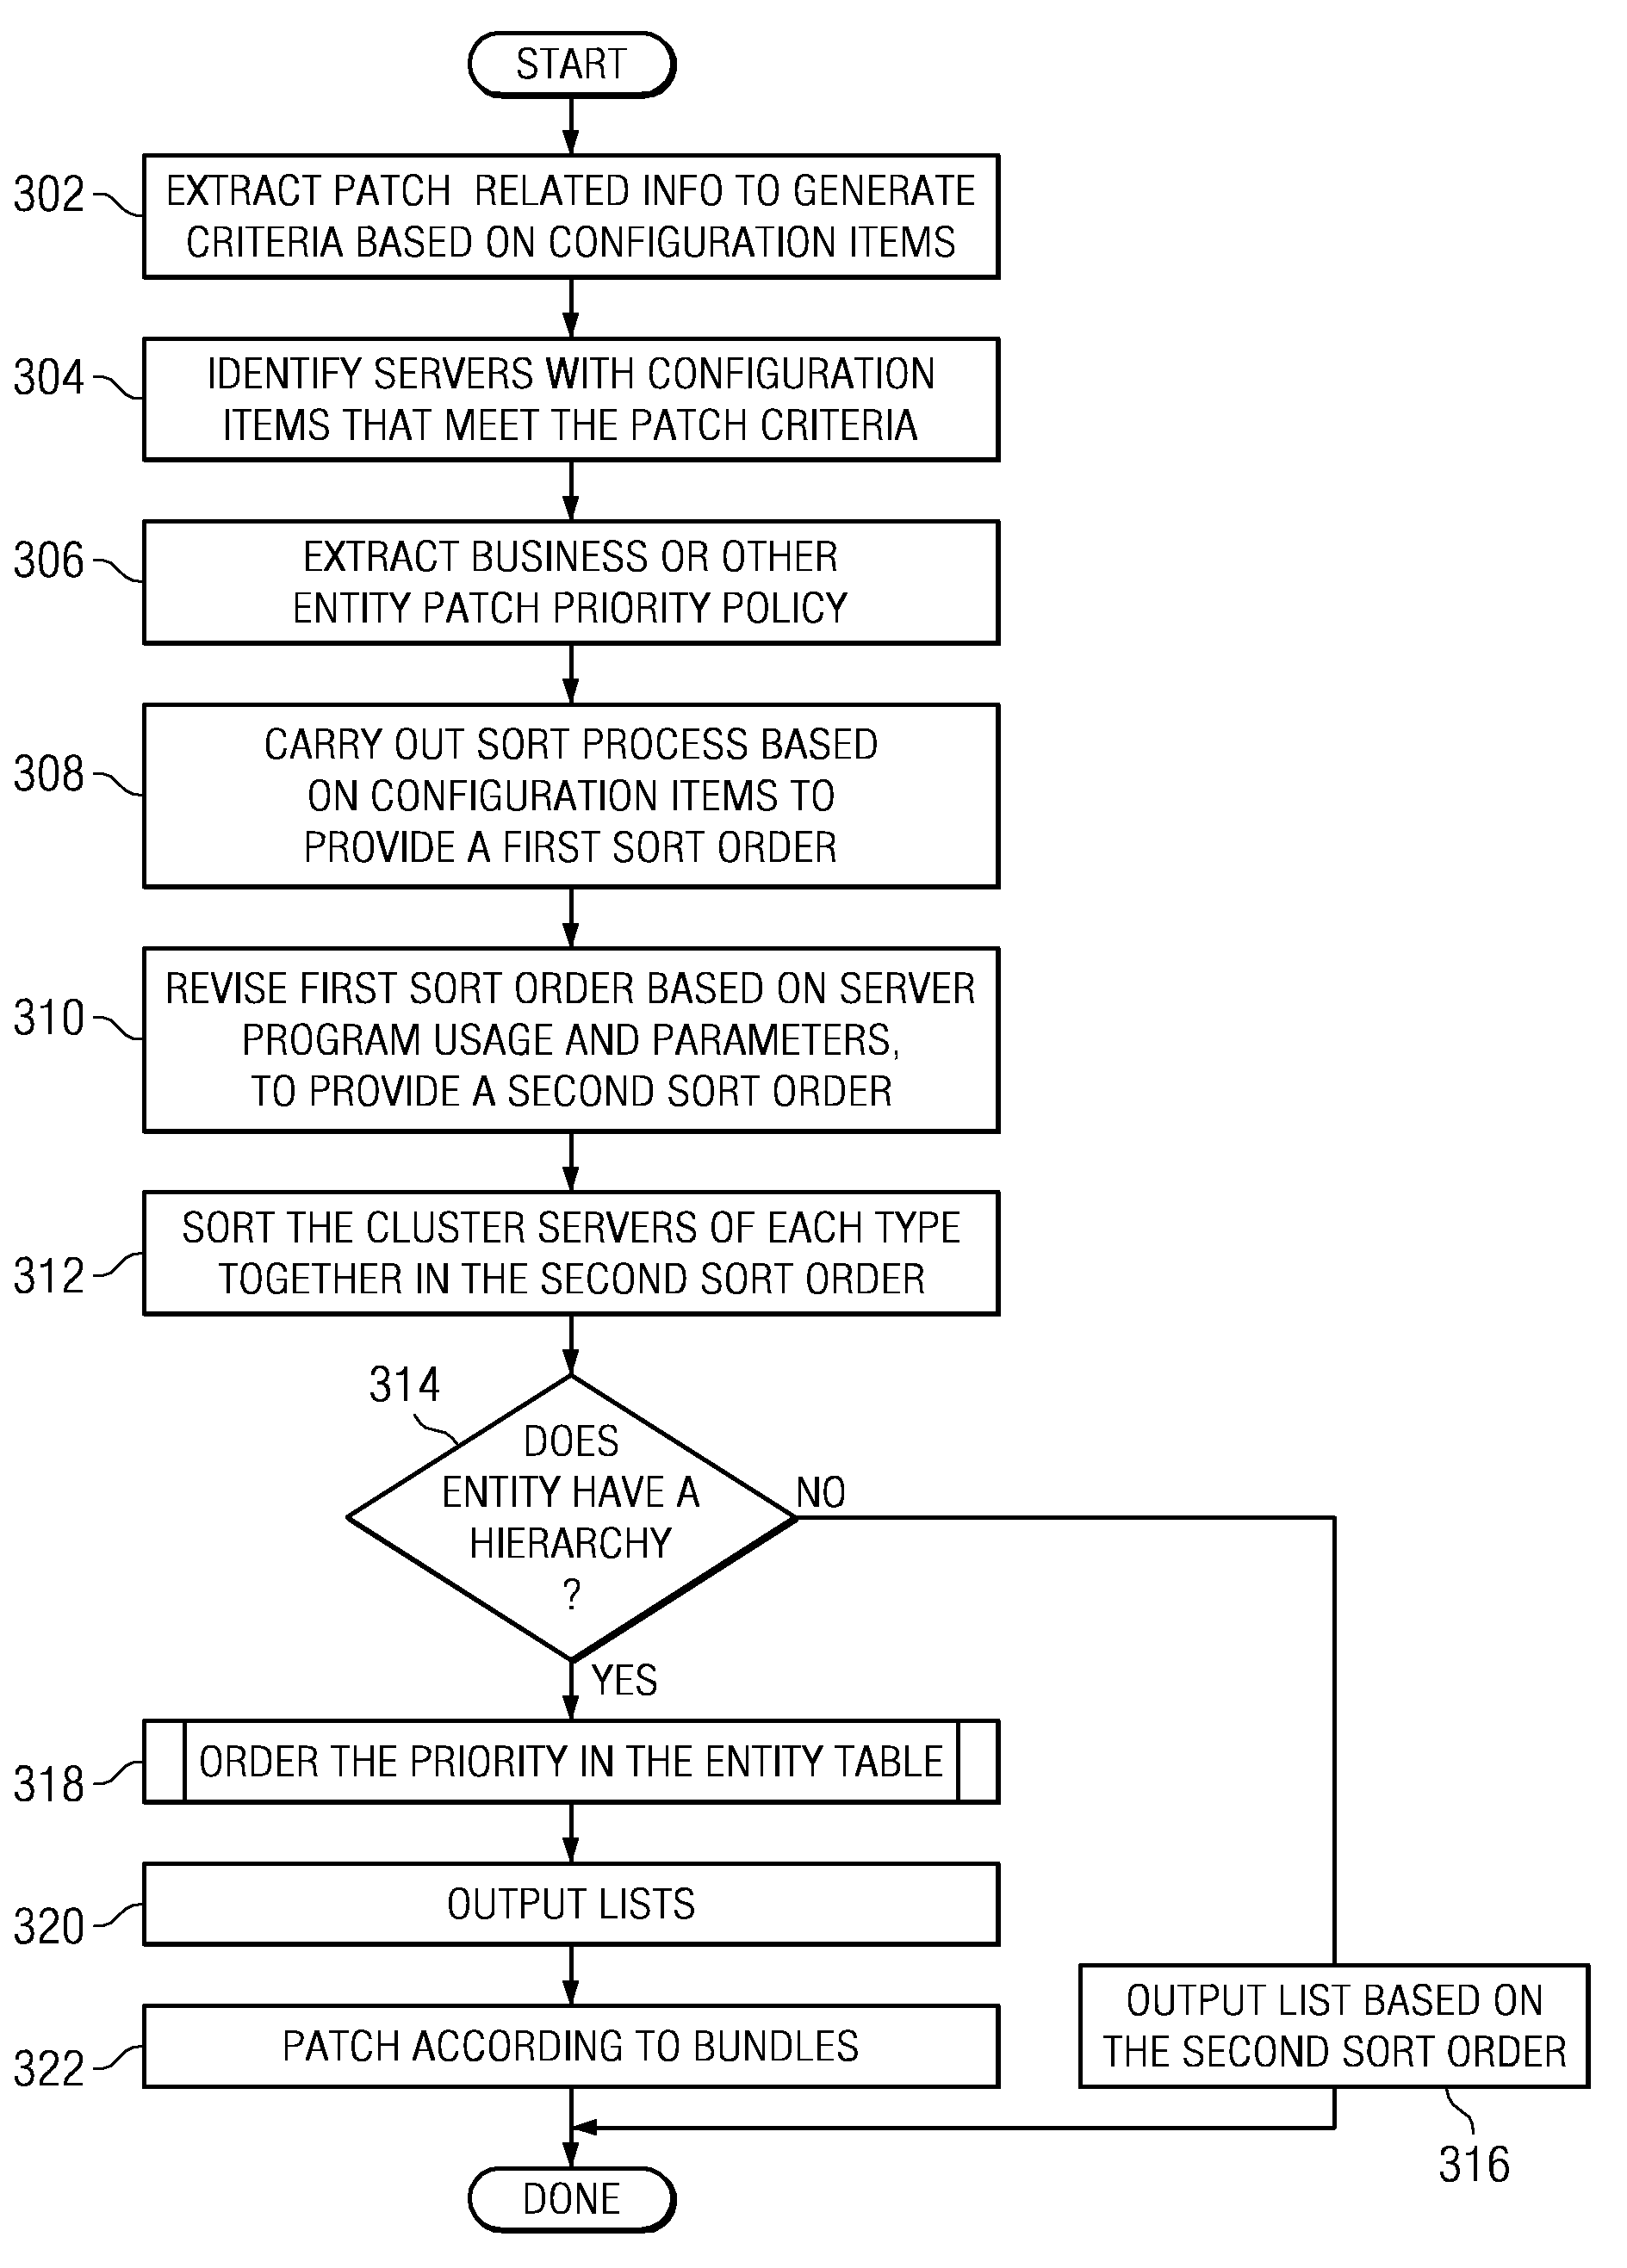 Determining priority for installing a patch into multiple patch recipients of a network